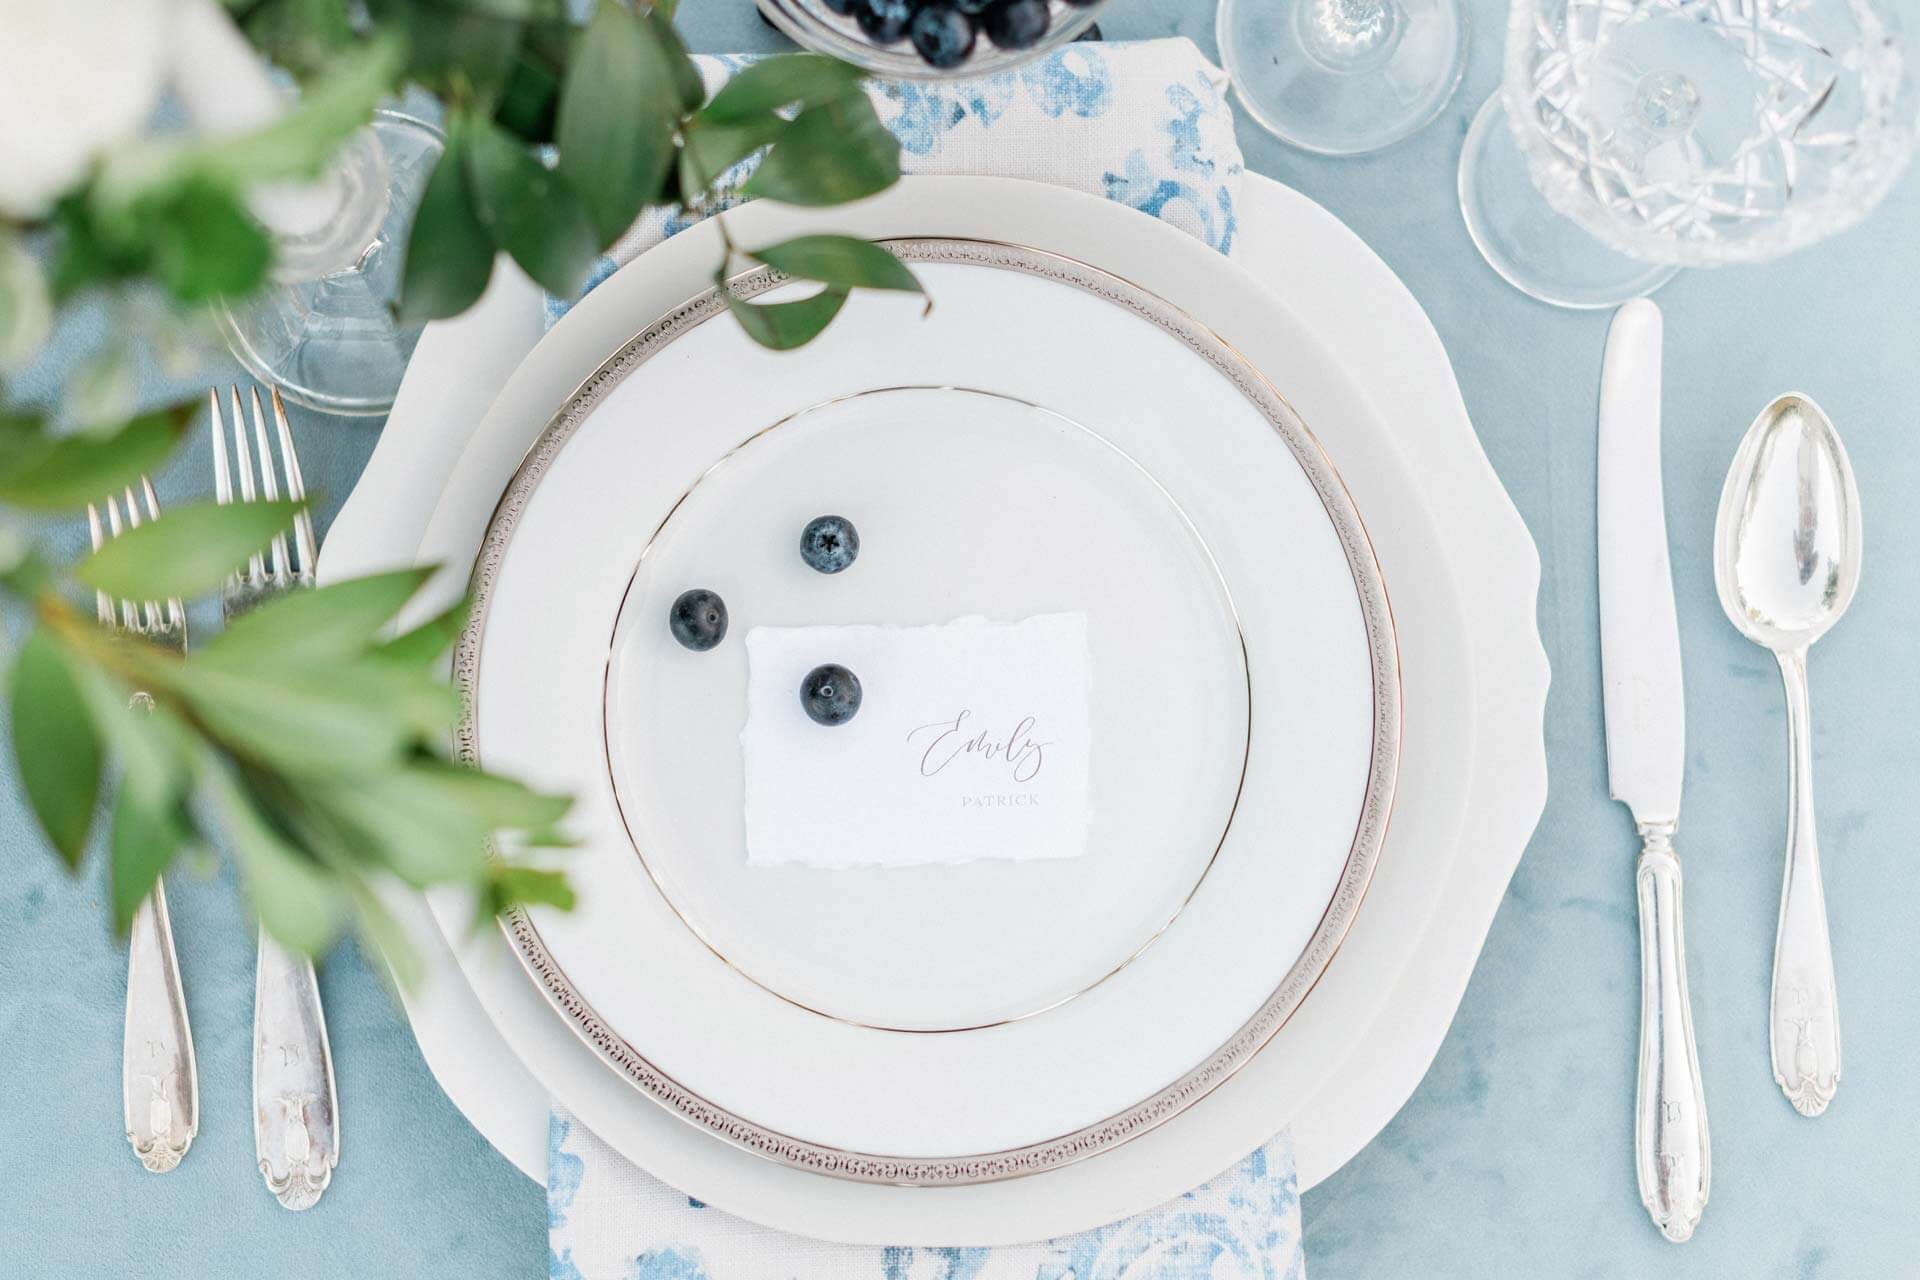 French Countryside Wedding Inspiration dishes